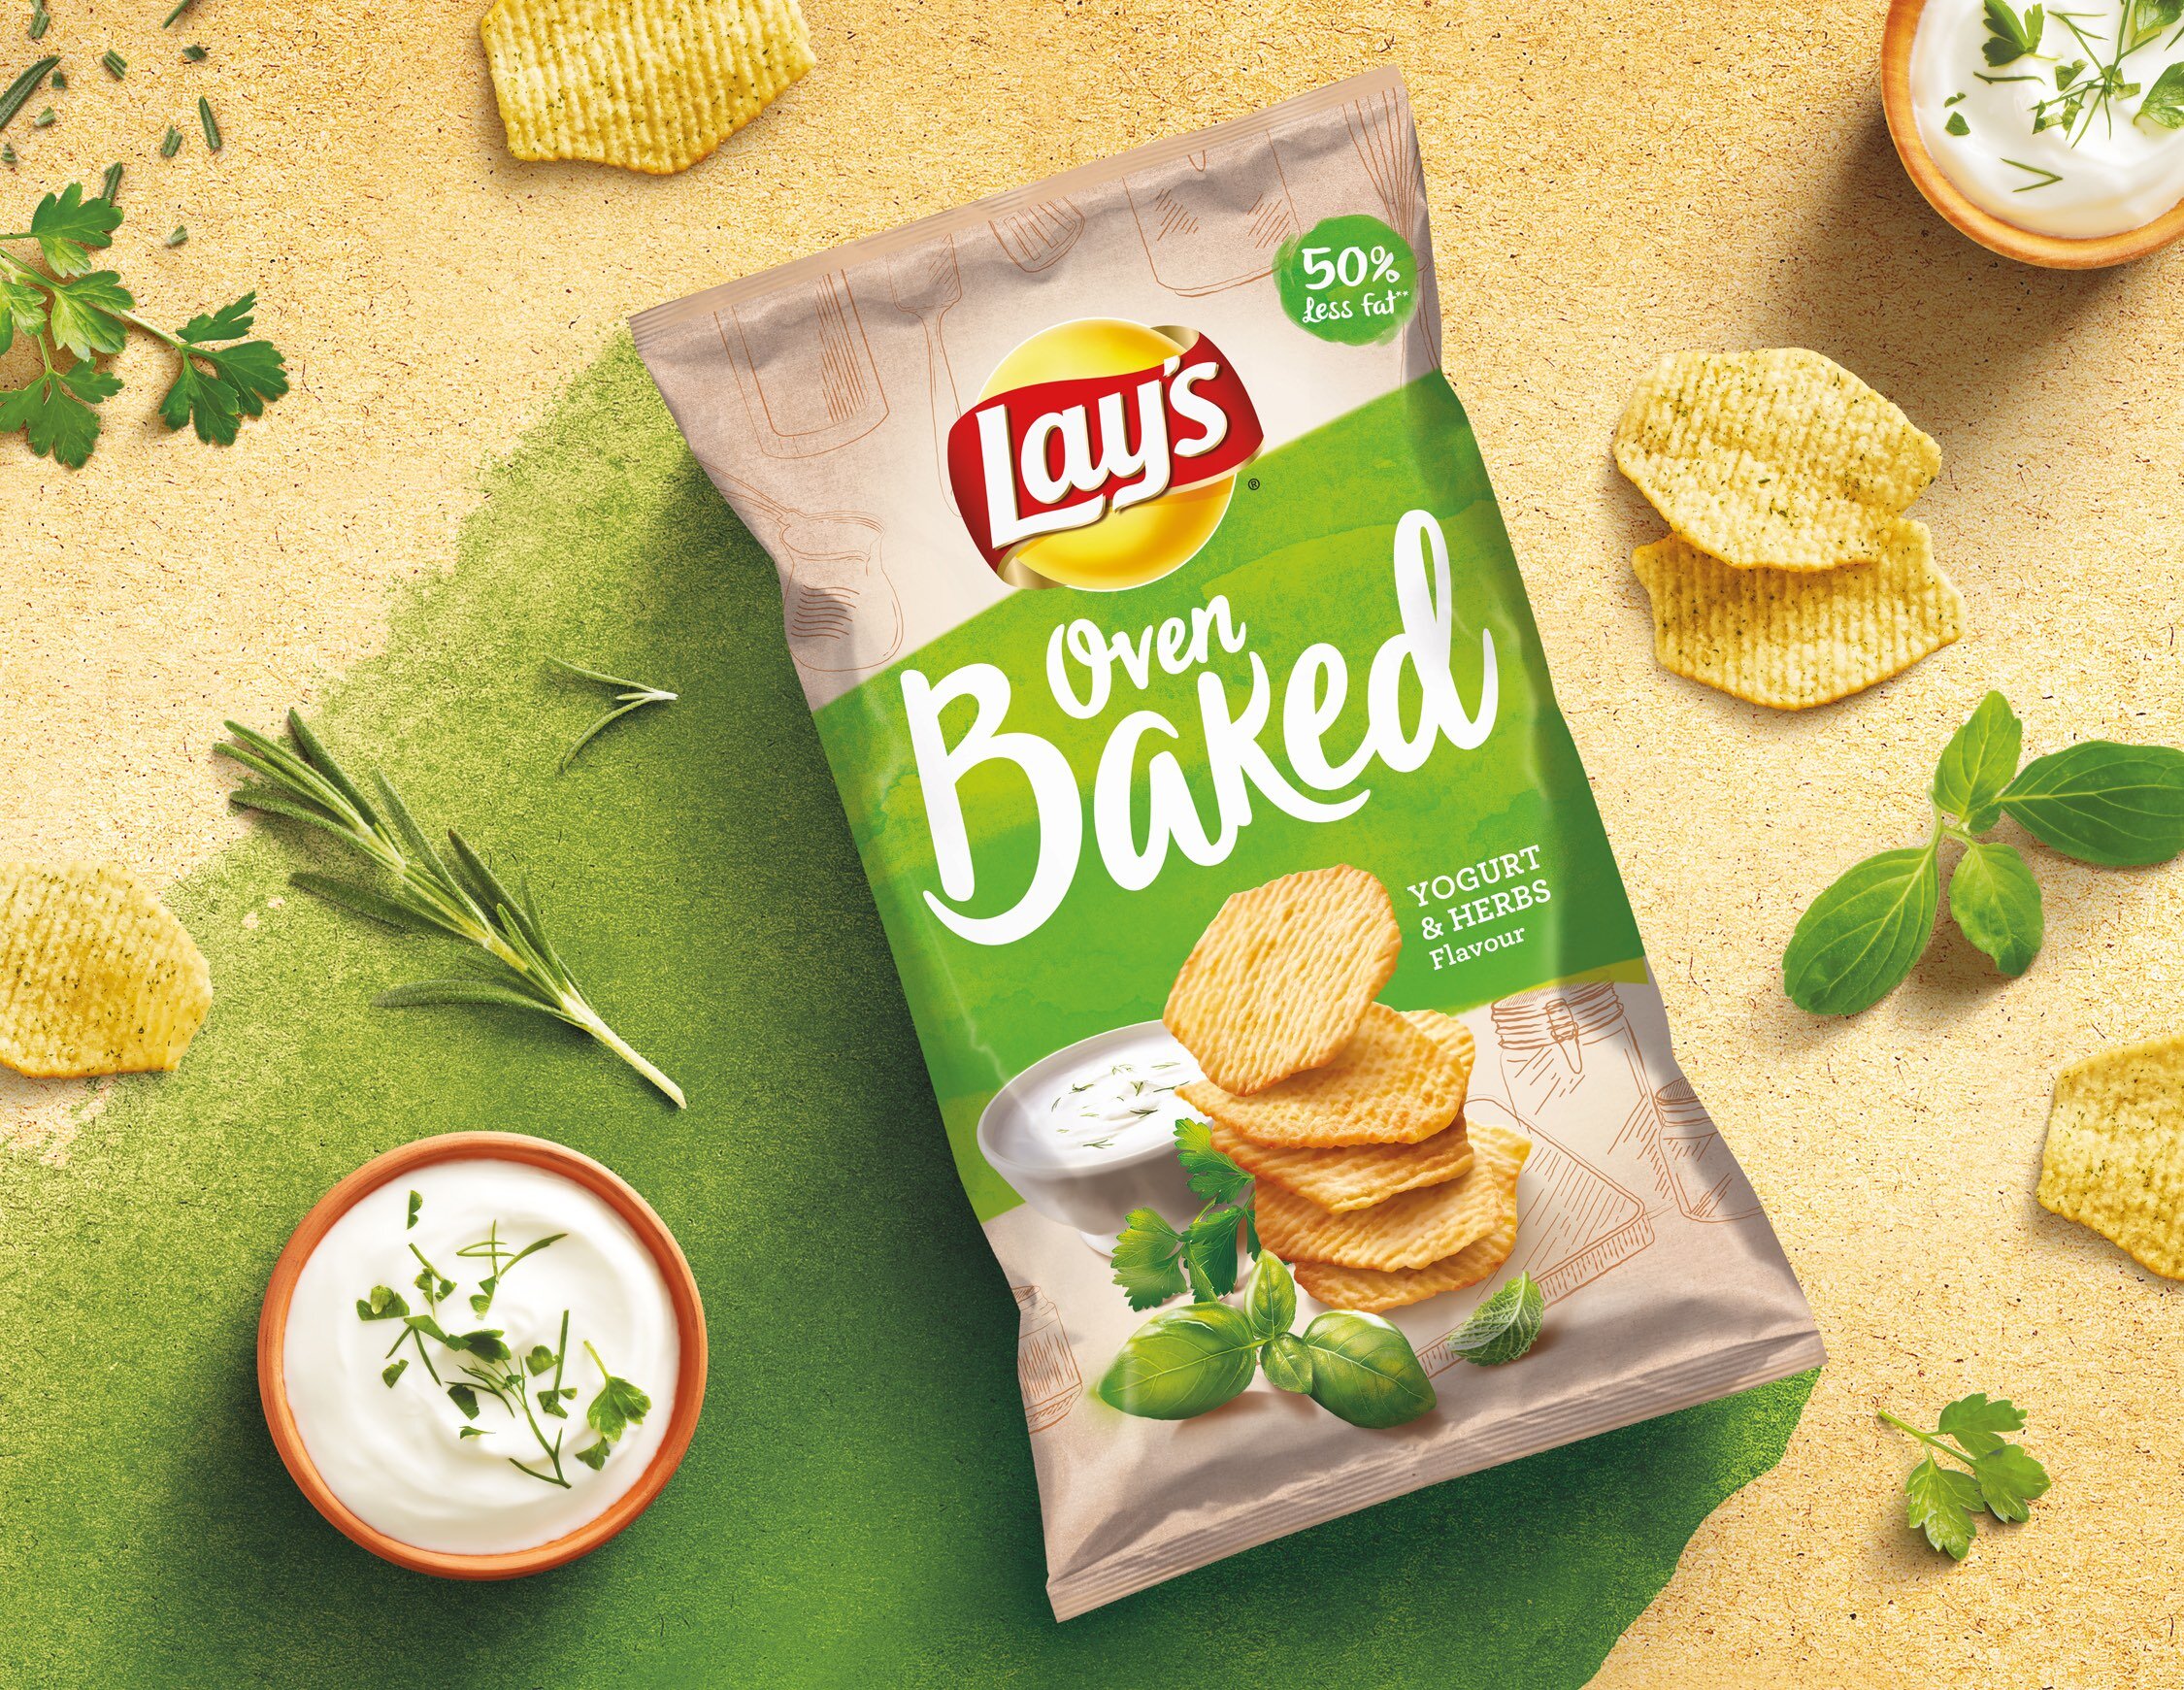 Lays_ExpanVIS_OvenBaked_Product_KV1_Landscape_YogHerb_small.jpg